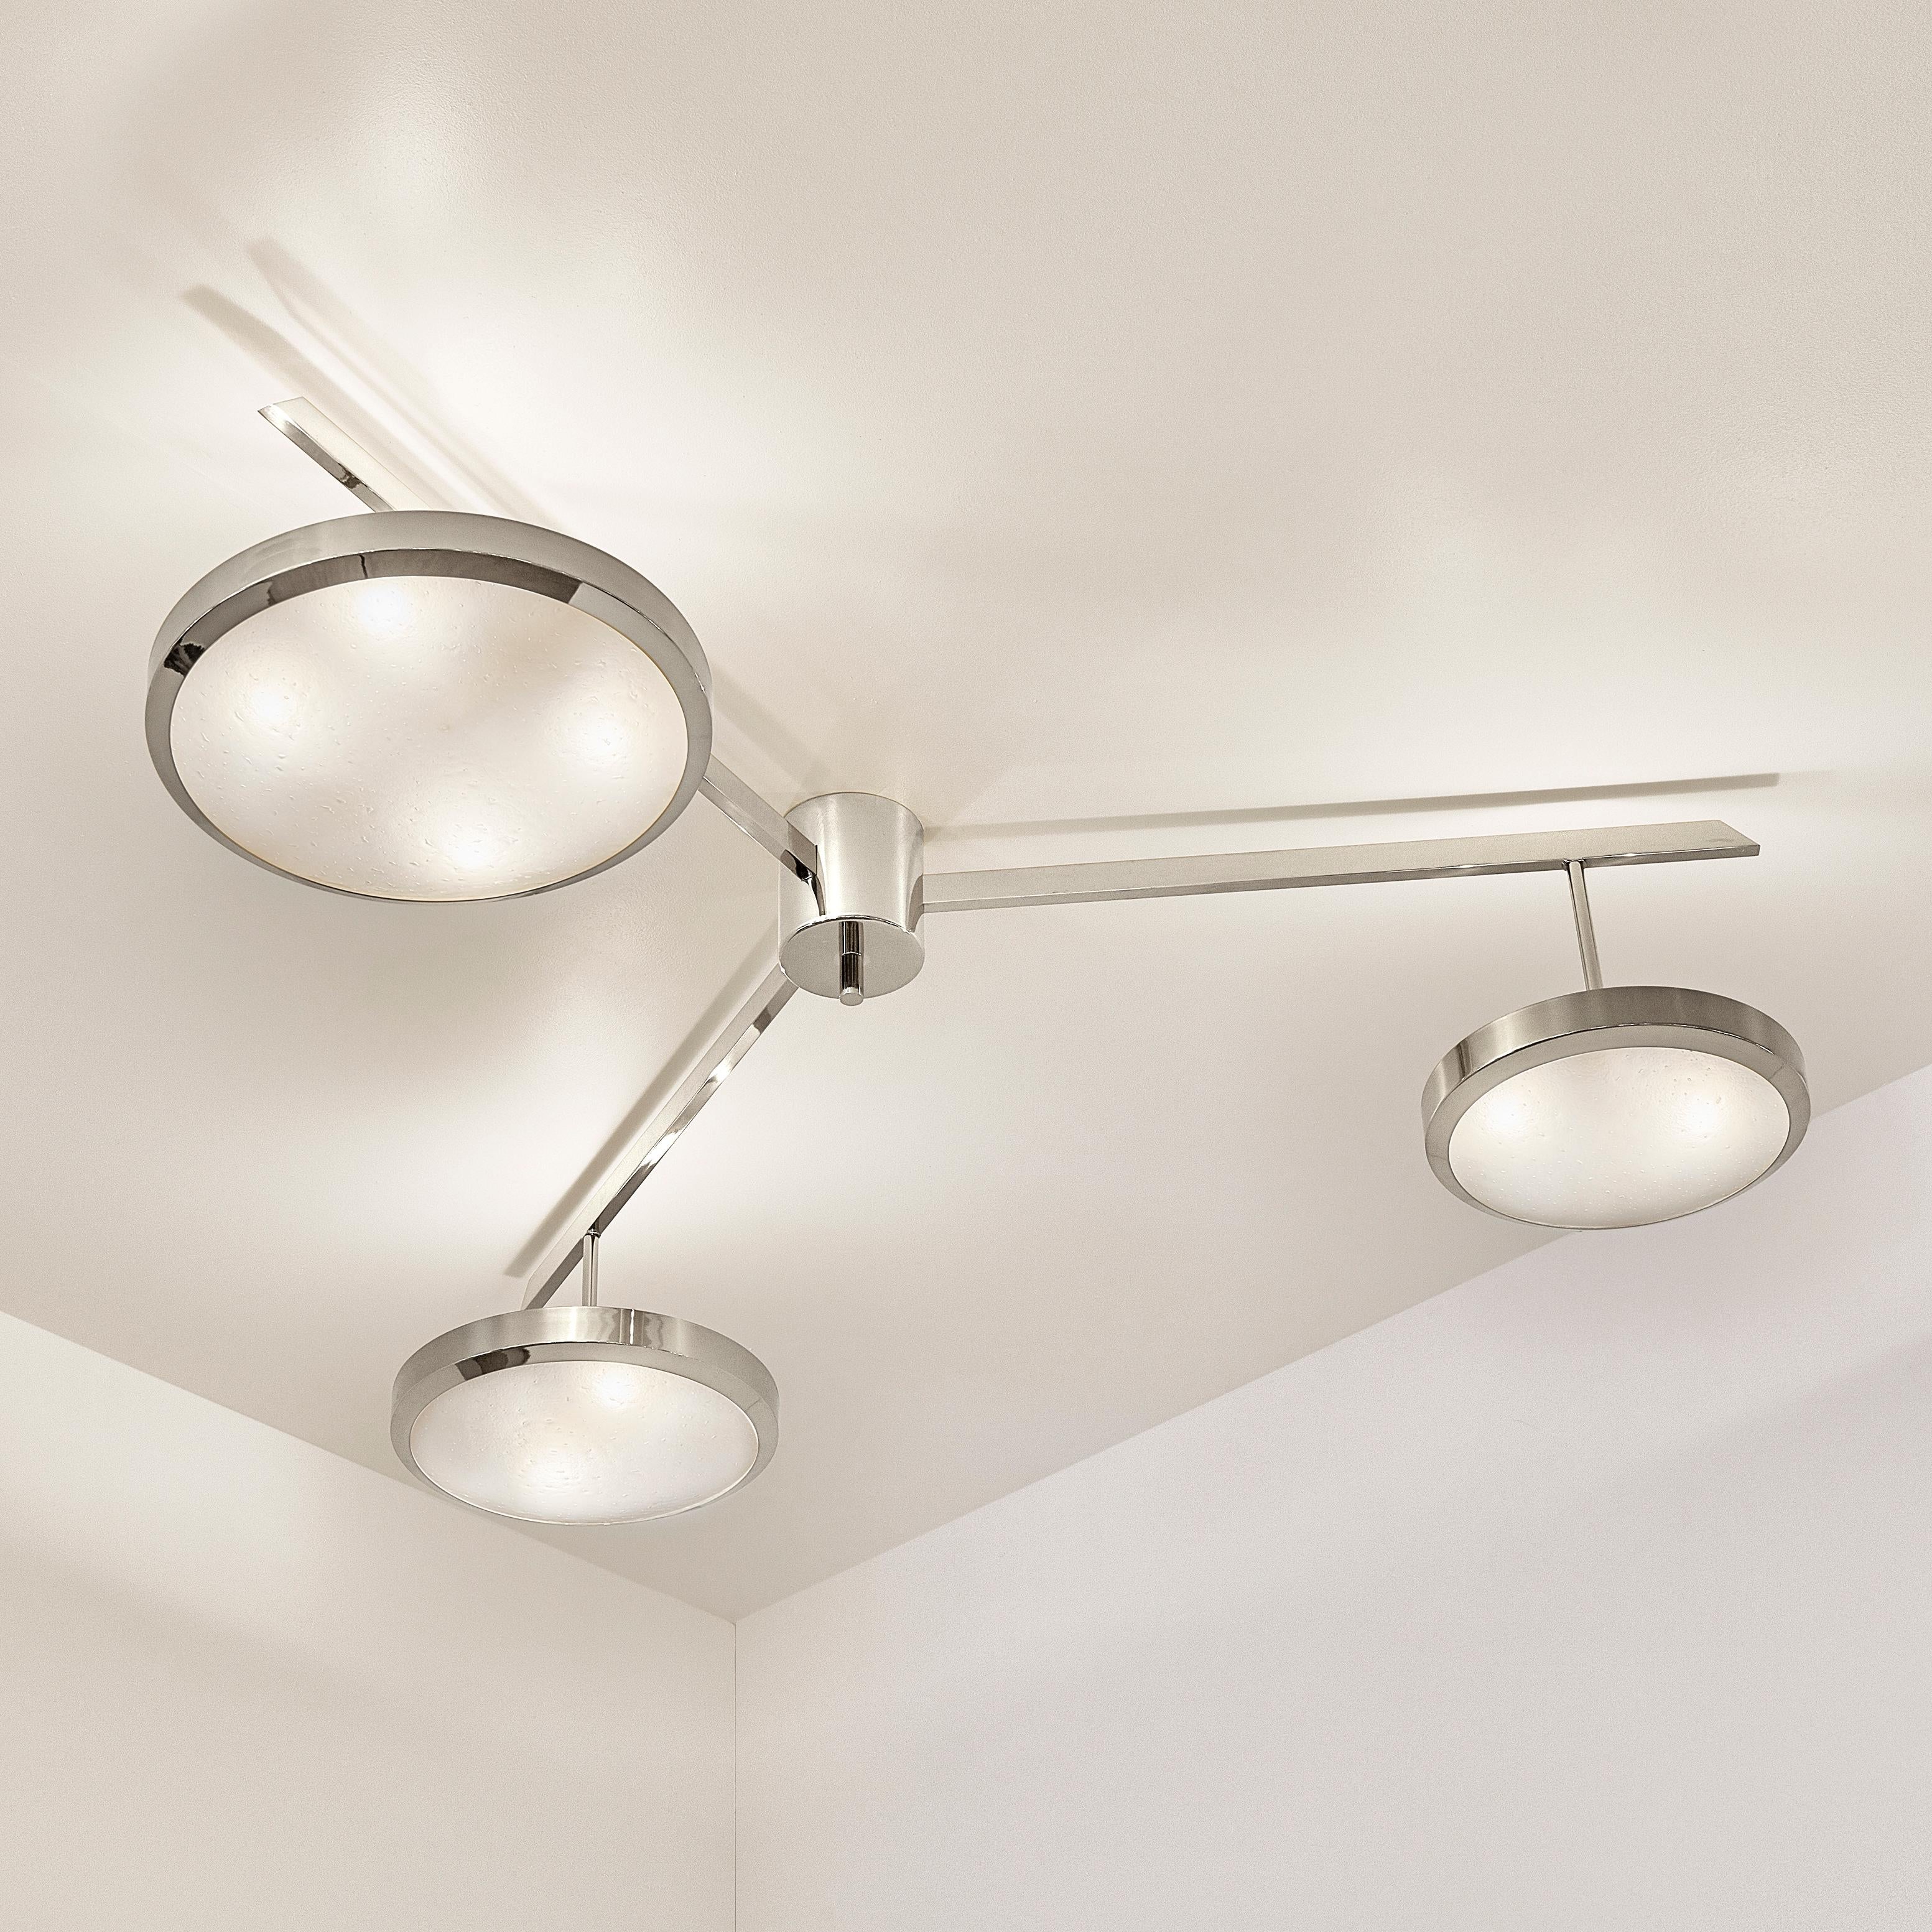 The Tre ceiling light harmoniously juxtaposes the balance of its three evenly spaced arms with the asymmetry of its variable size shades staggered at different heights. The first images show the fixture in our polished nickel finish-subsequent